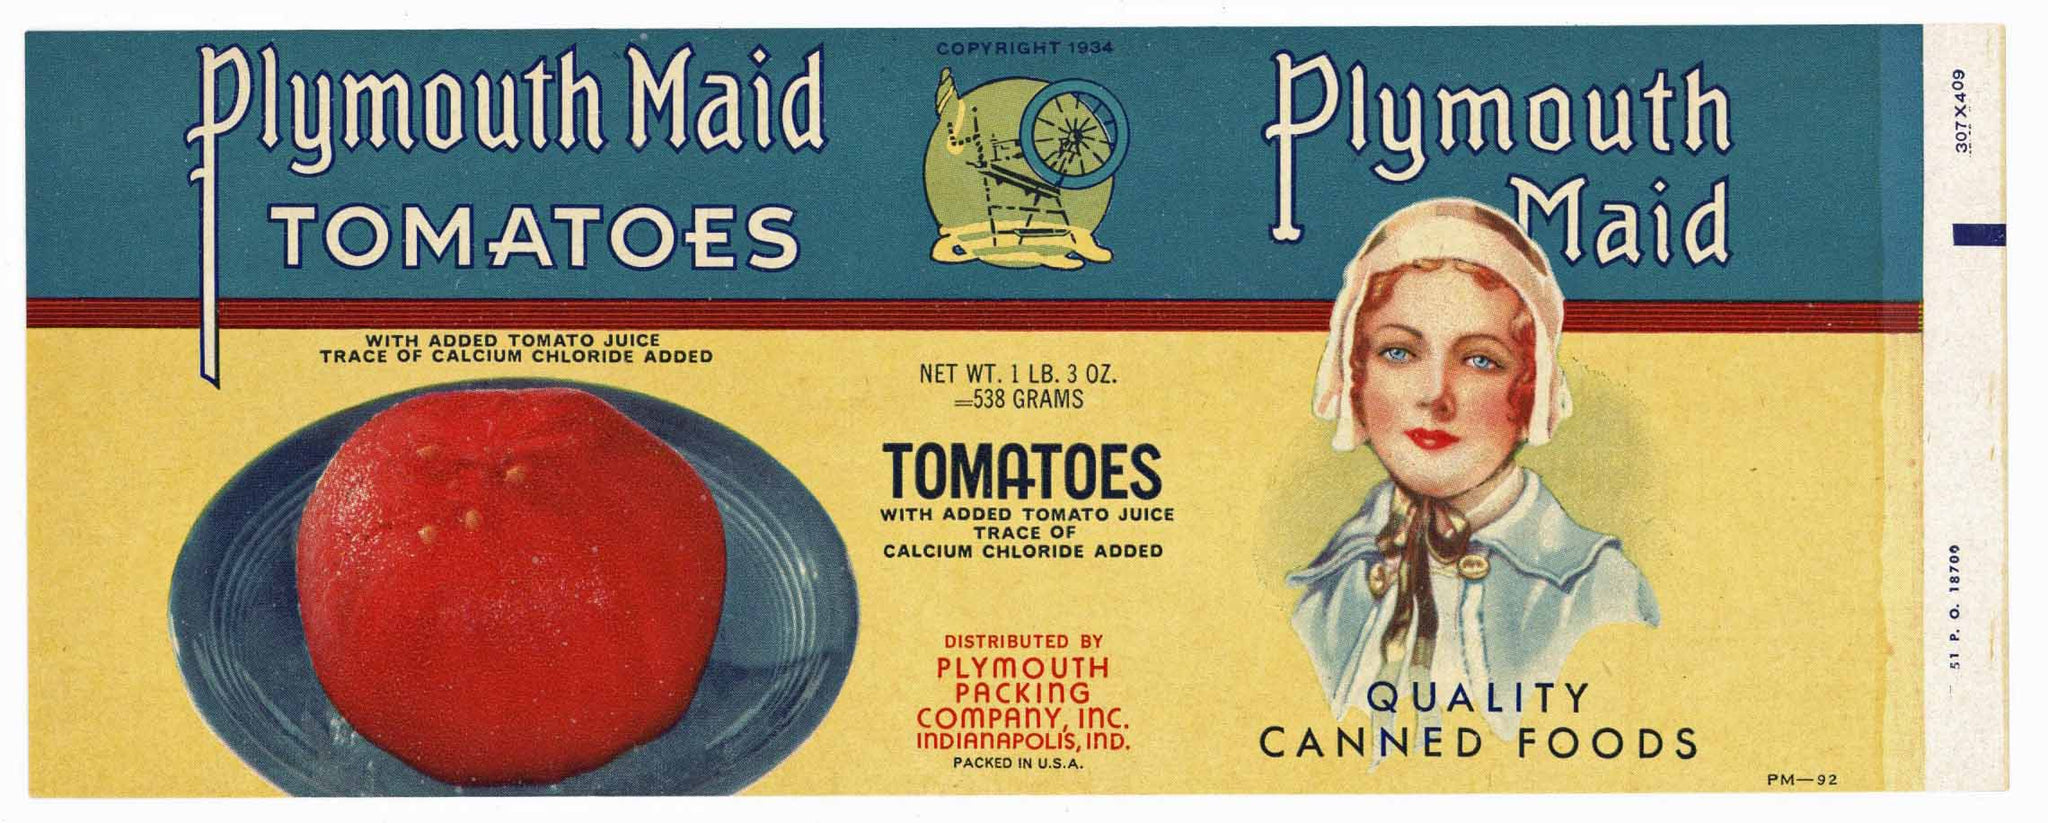 Plymouth Maid Brand Vintage Indianapolis Indiana Tomato Can Label